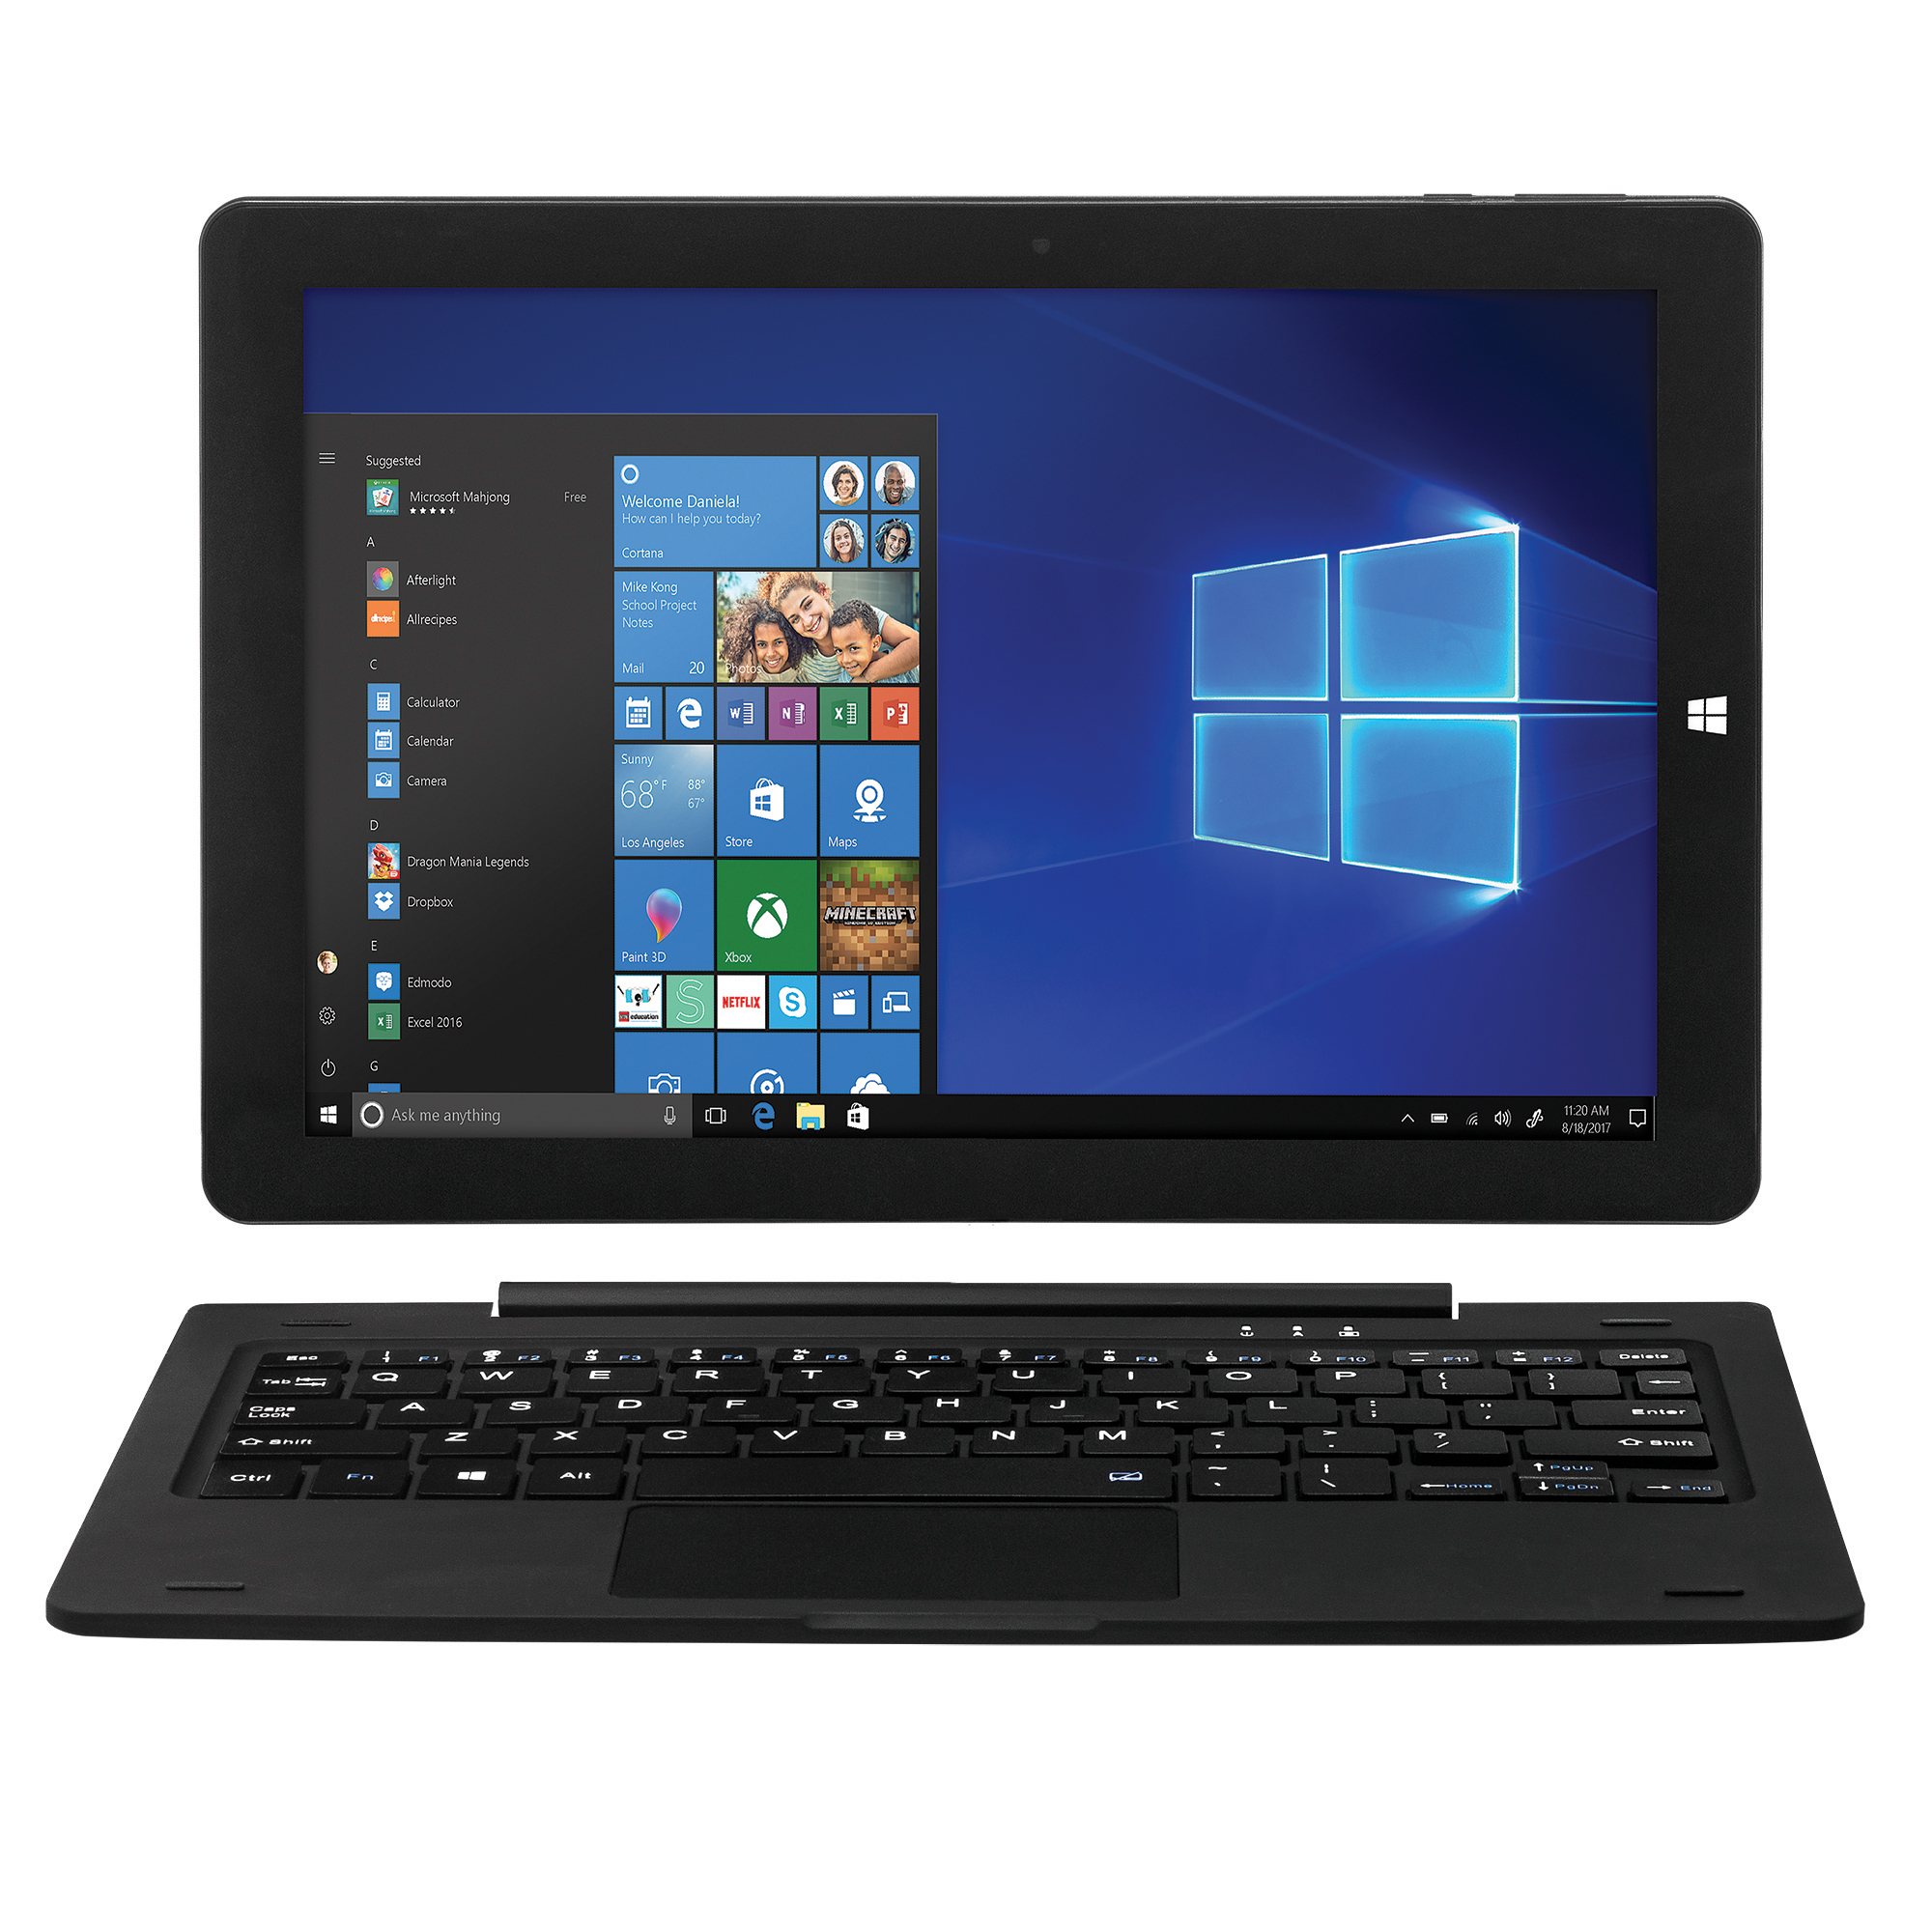 EVOO 10.1" Tablet with Keyboard, Dual Core, Intel Processor, 32GB Storage, Windows Ink (Smart Stylus included), Micro HDMI, Dual Cameras, Windows 10 Home, Black - image 2 of 2